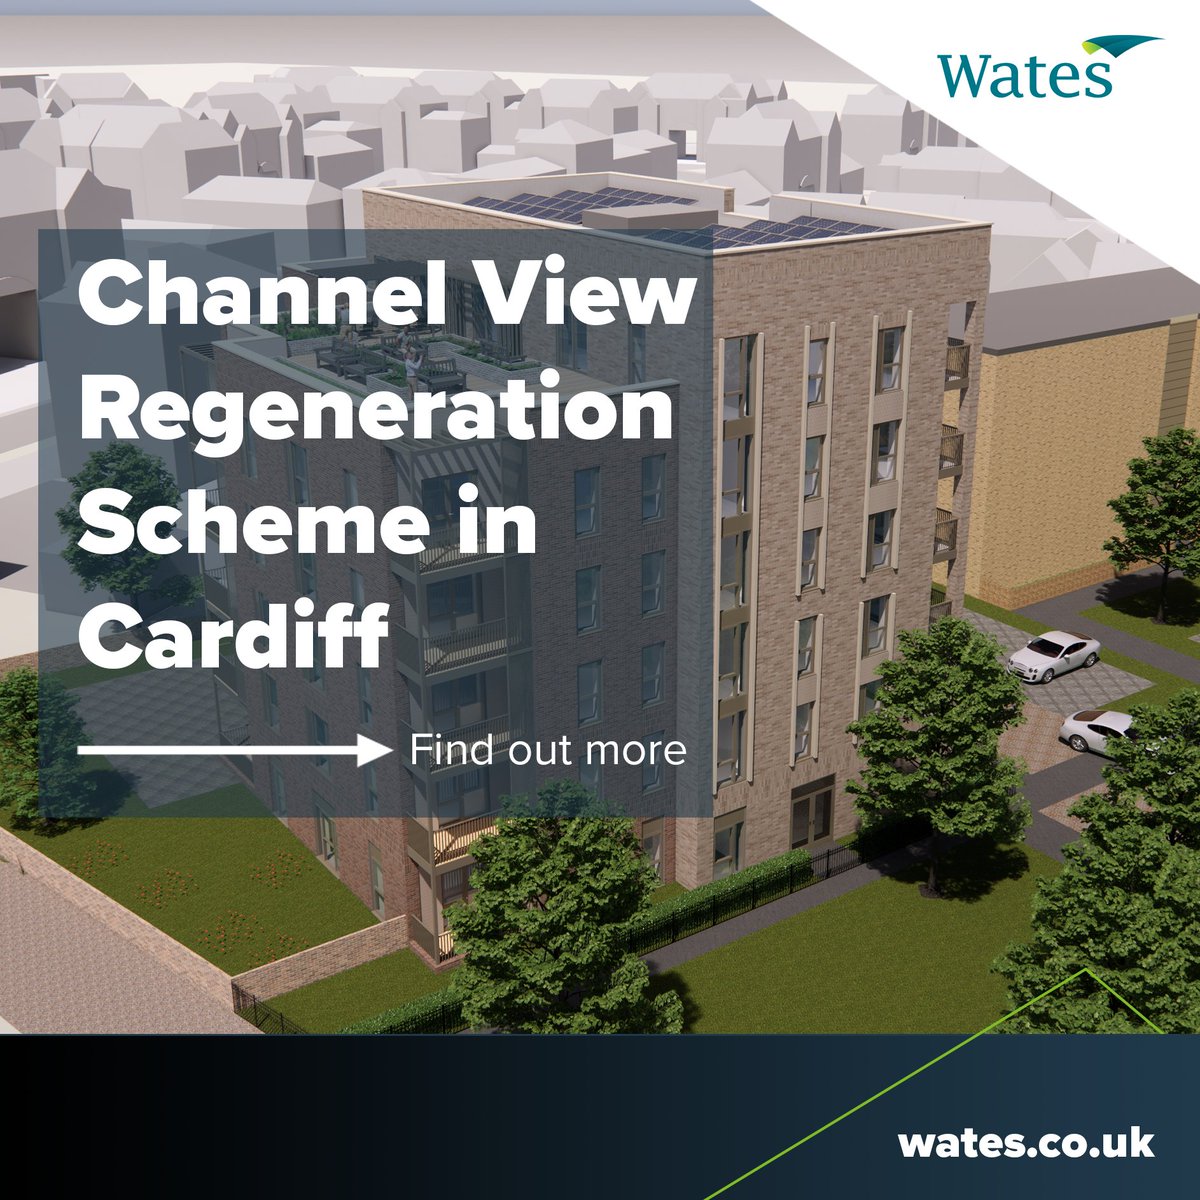 We are thrilled to announce that @cardiffcouncil has chosen us to lead the regeneration of the Channel View estate in Grangetown. This project will bring about the creation of up to 400 new, energy-efficient, low-carbon homes. eu1.hubs.ly/H08lfSf0